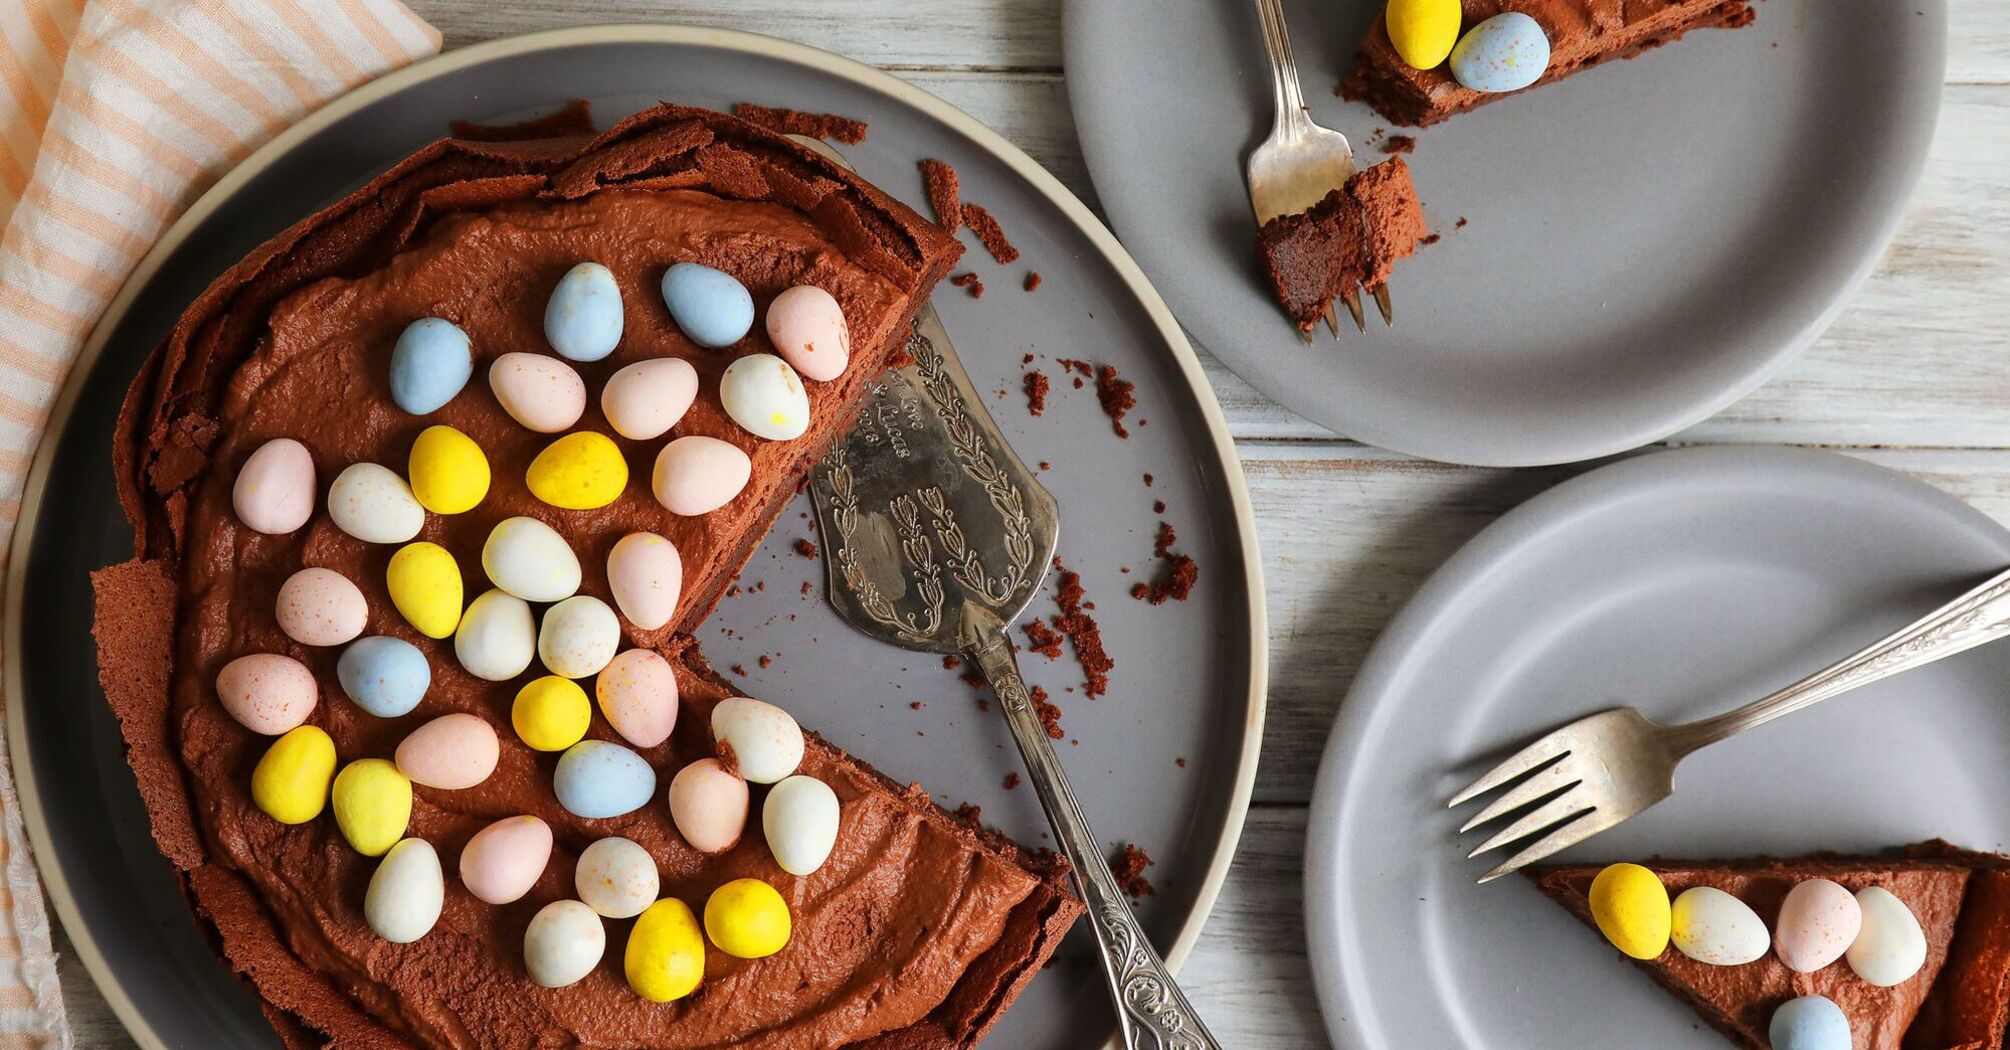 Quick Easter cake without too much hassle